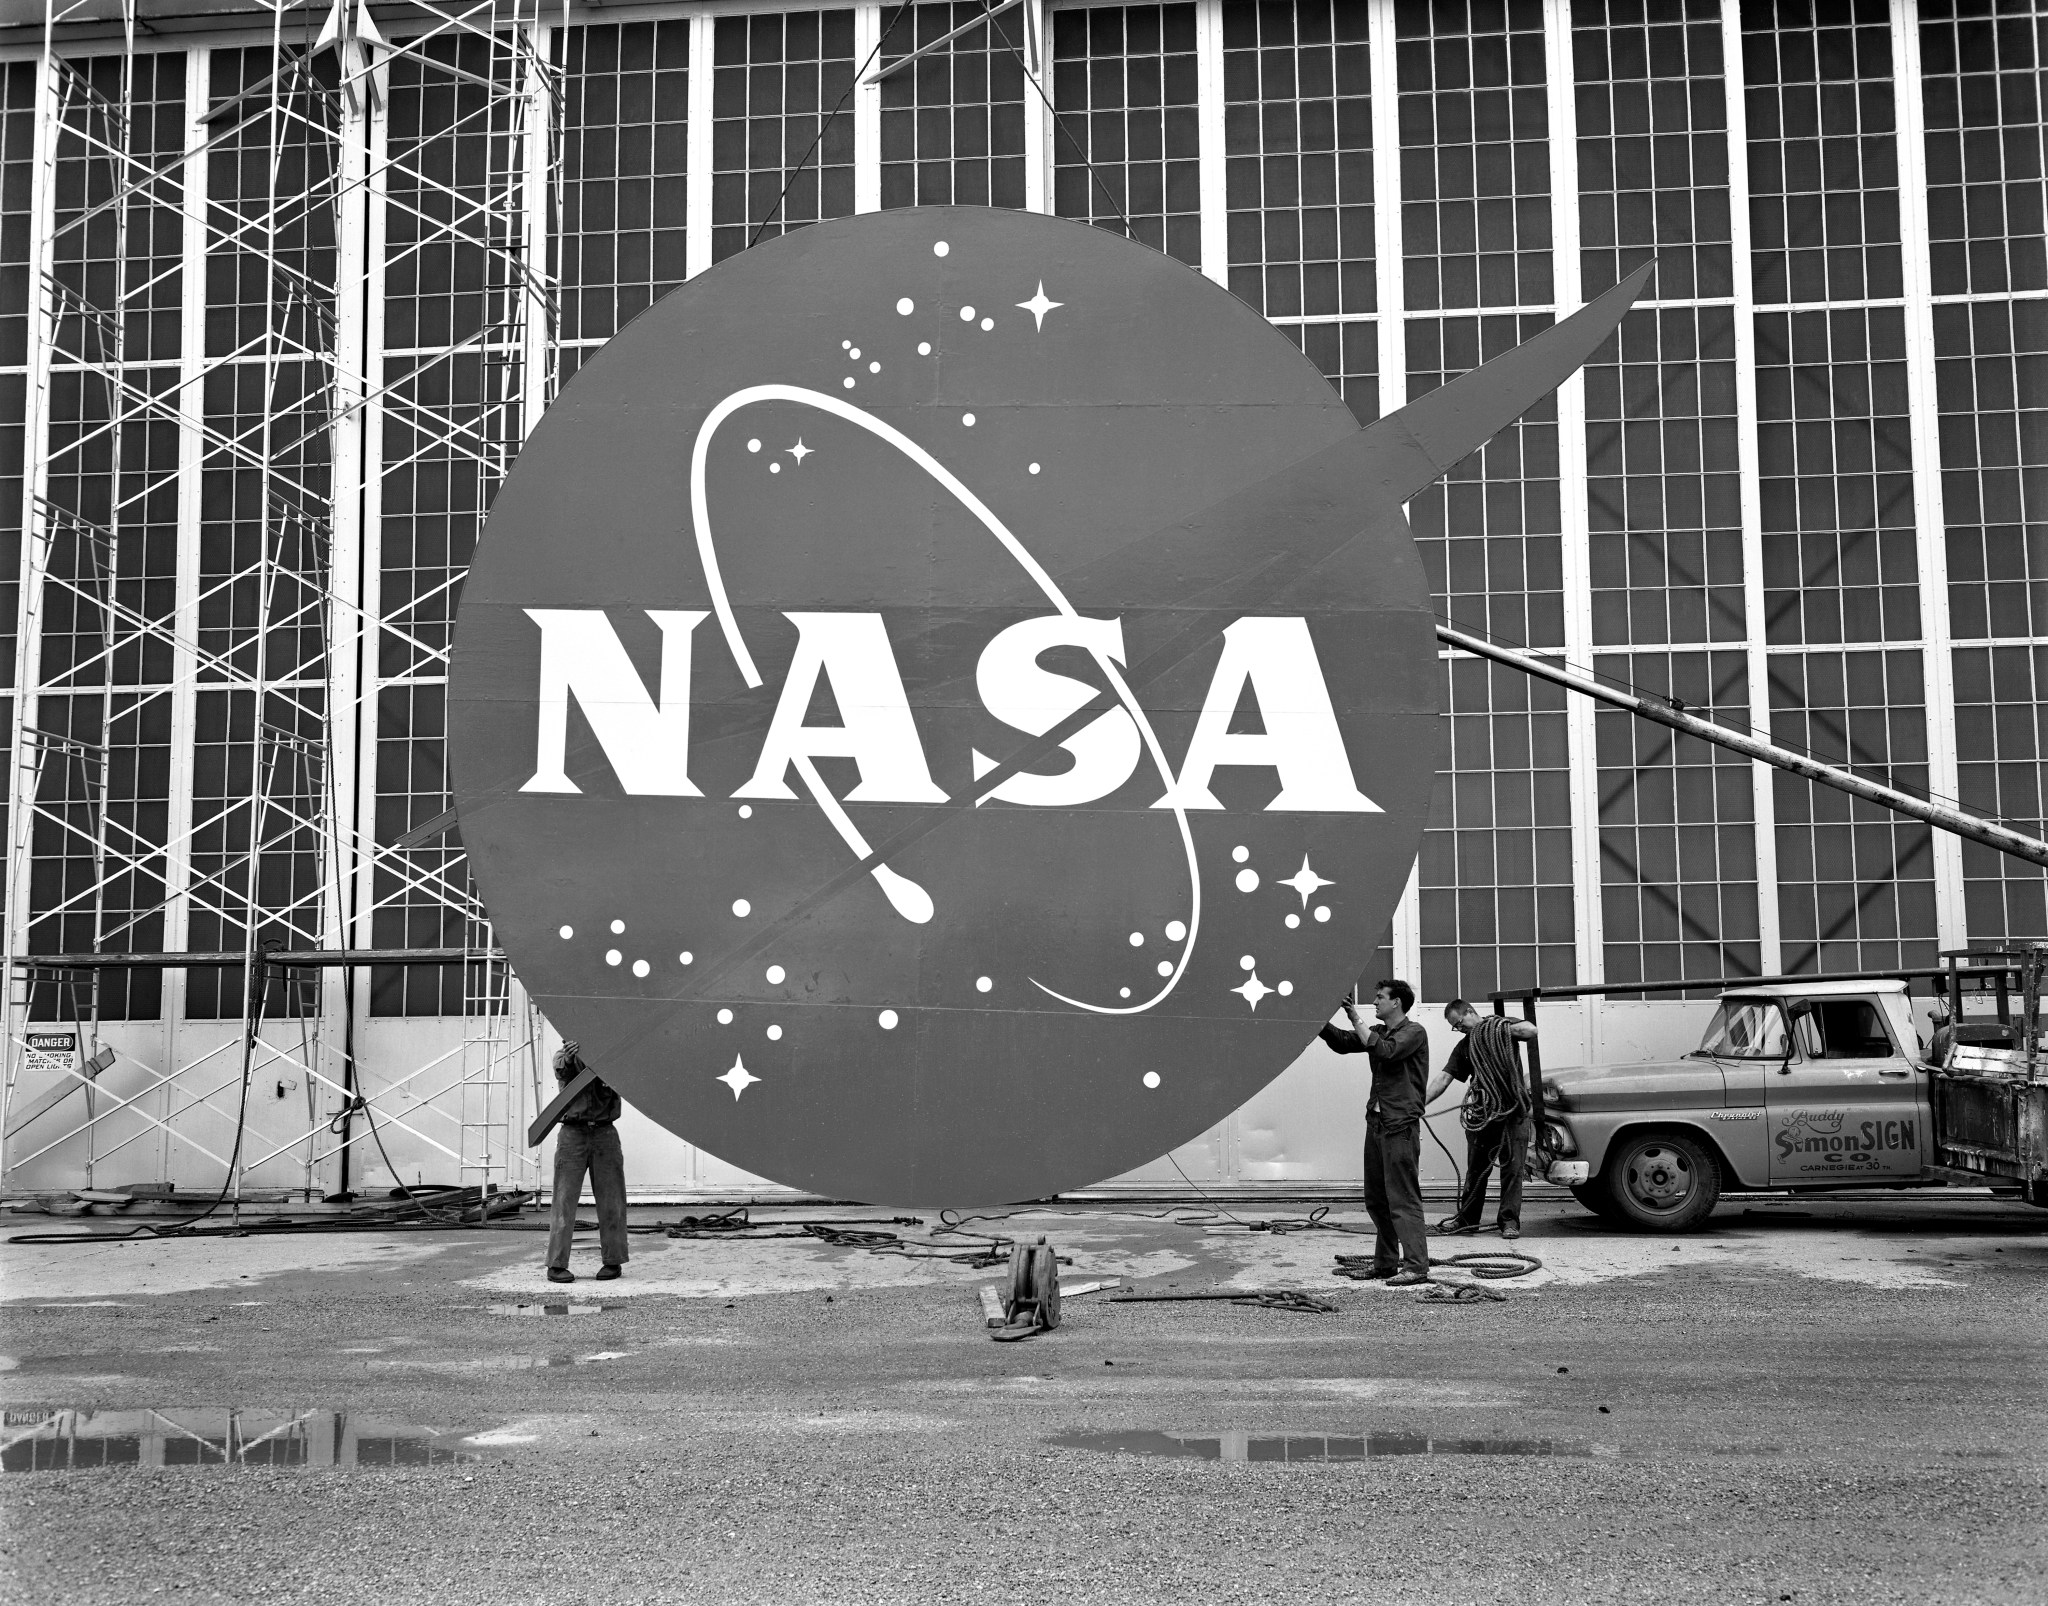 In this black-and-white photo, three workers stand below a large NASA logo sign. Two of the workers hold either end of the sign. They stand in front of a hangar building with scaffolding.